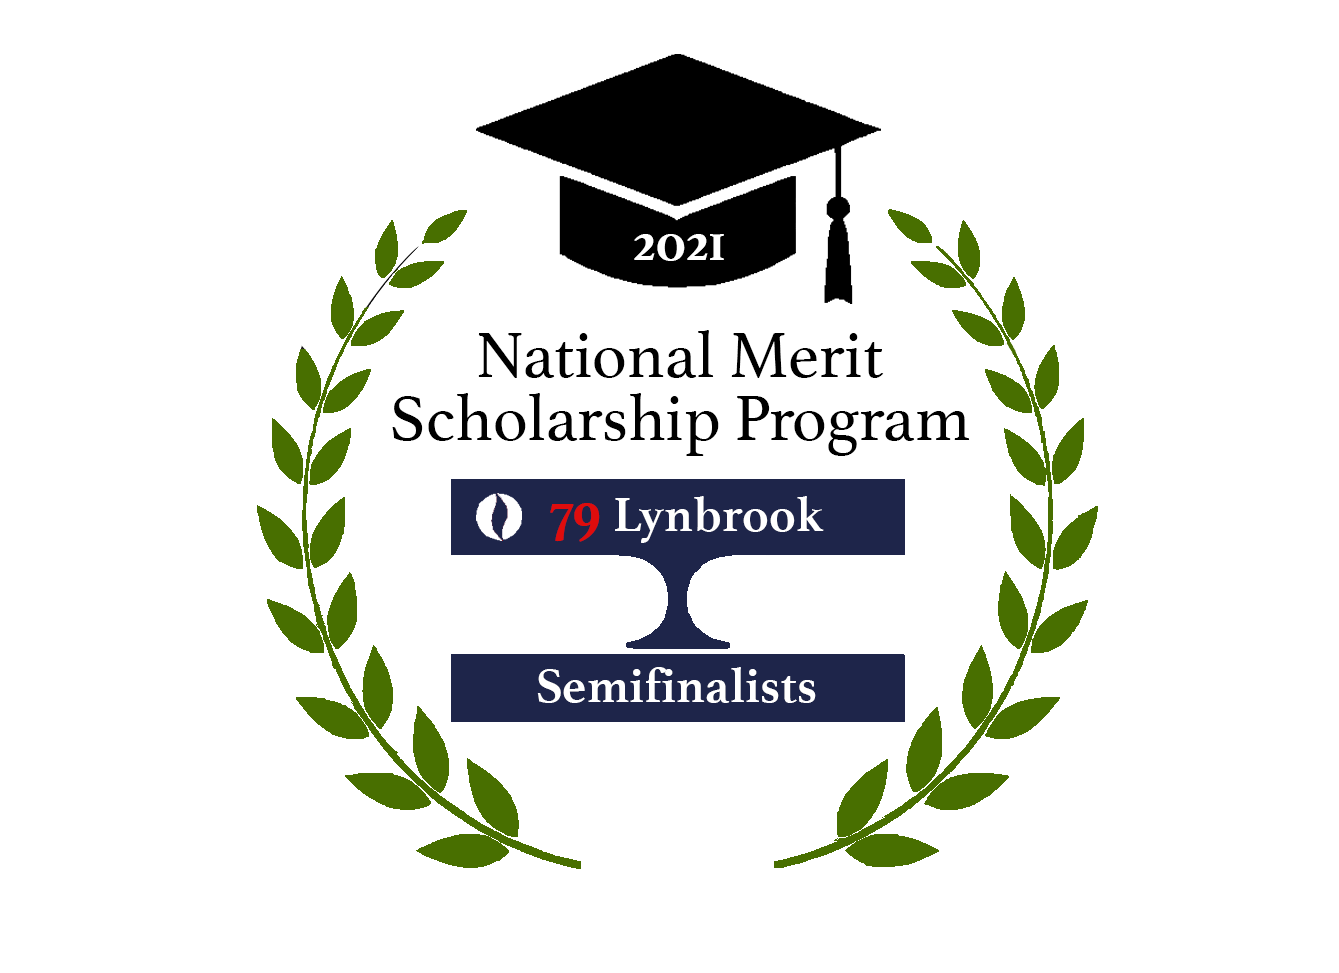 Lynbrook awarded highest number of National Merit Semifinalists in